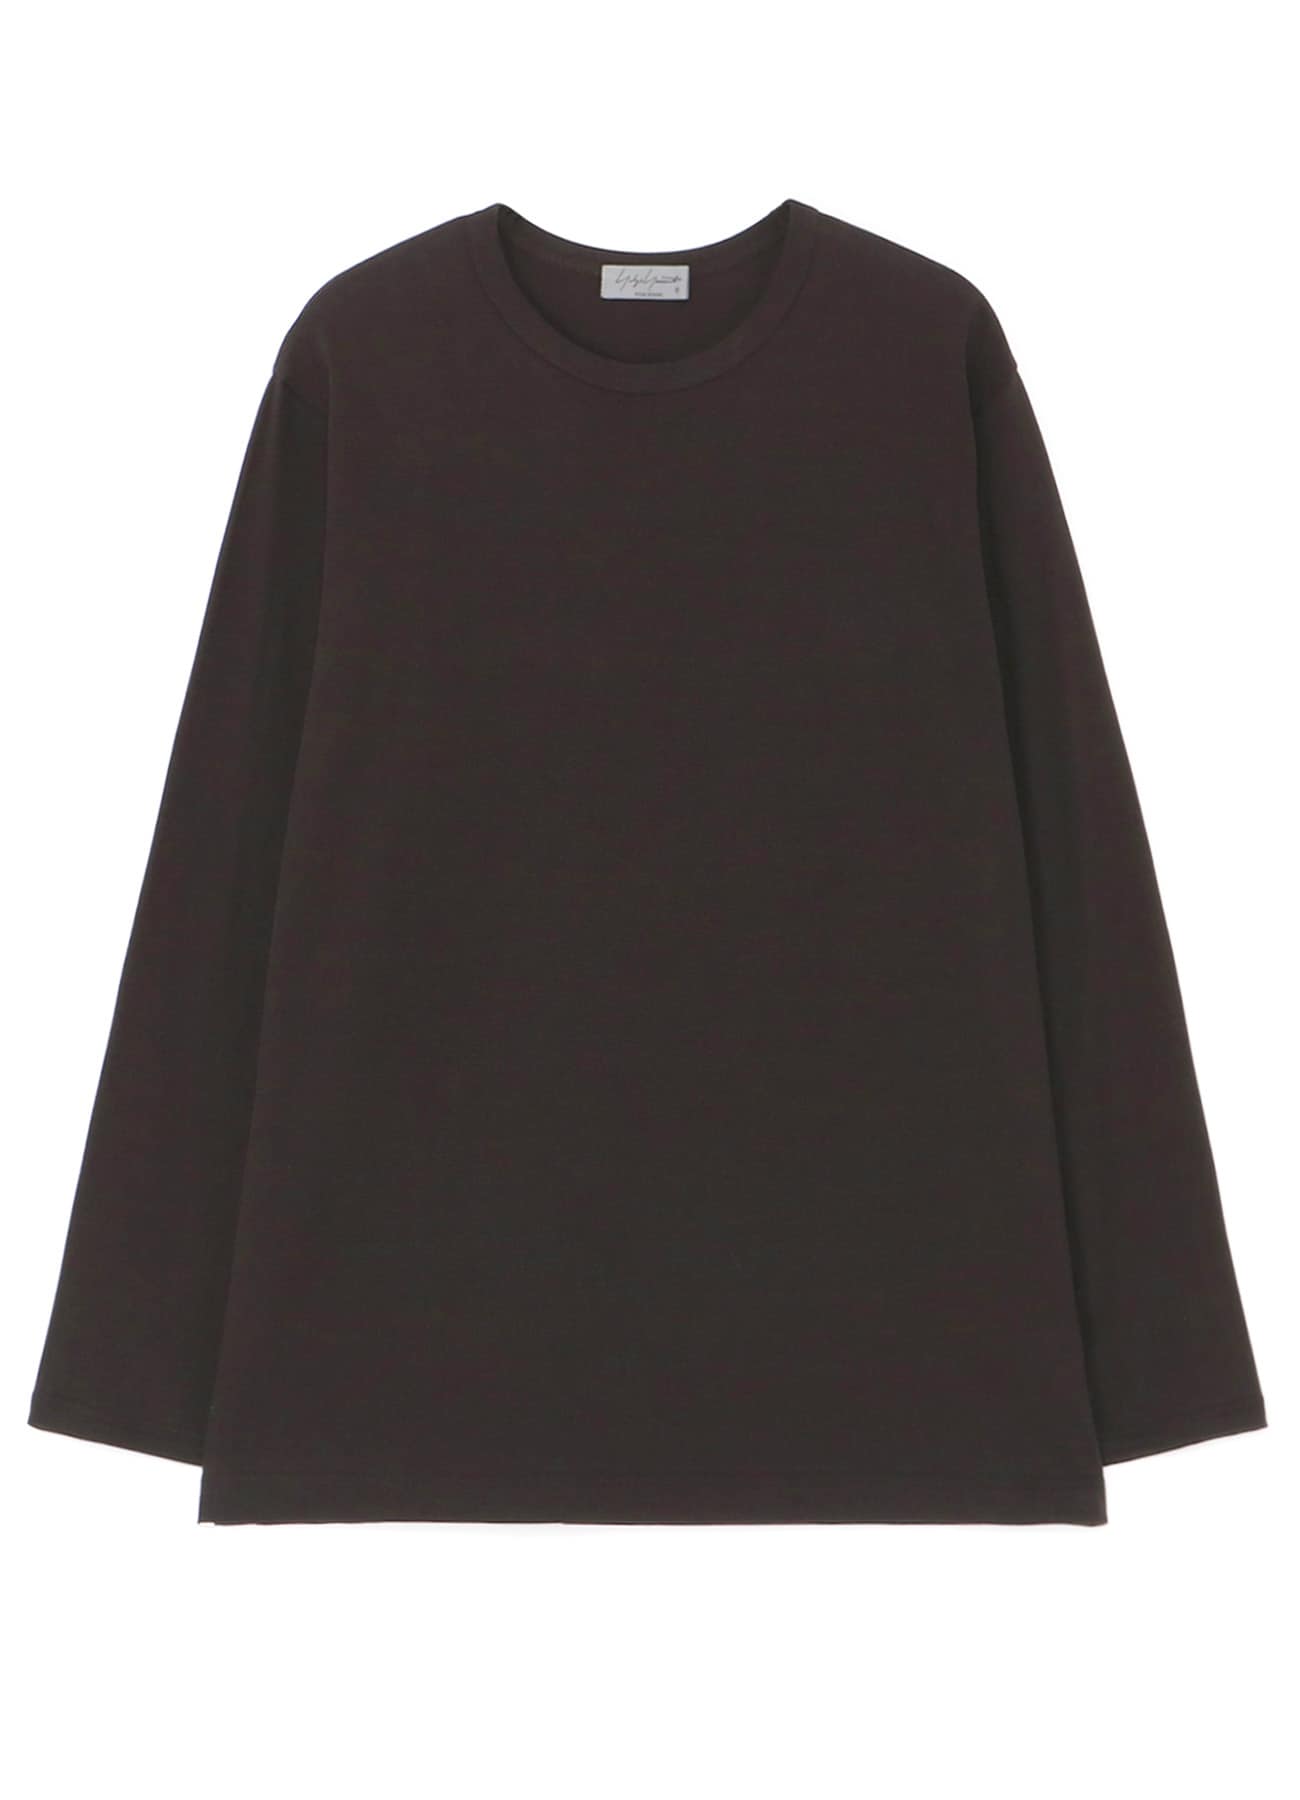 30-ALTIMA PS ROUND NECK LONG SLEEVE